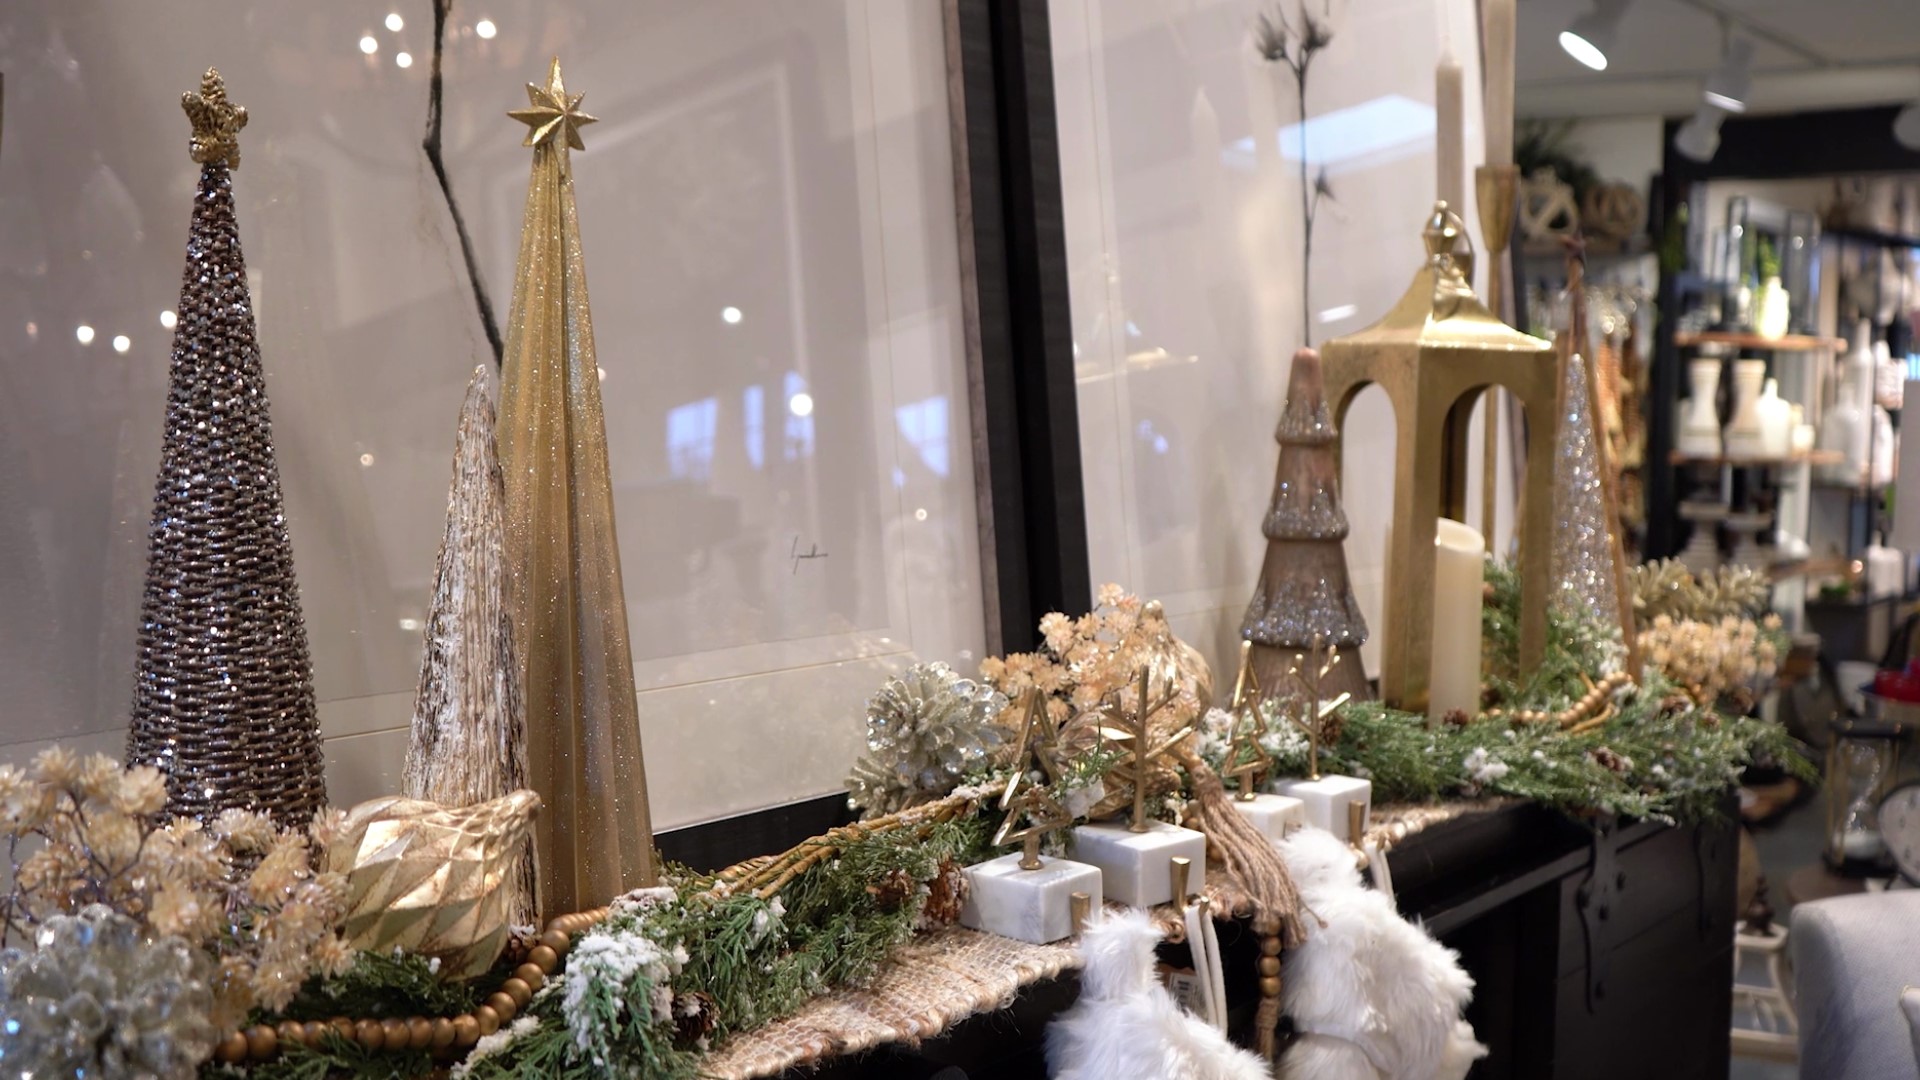 What to add in addition to a garland draped over your mantle, shelf or credenza during the holidays. Sponsored by Lucky Home.